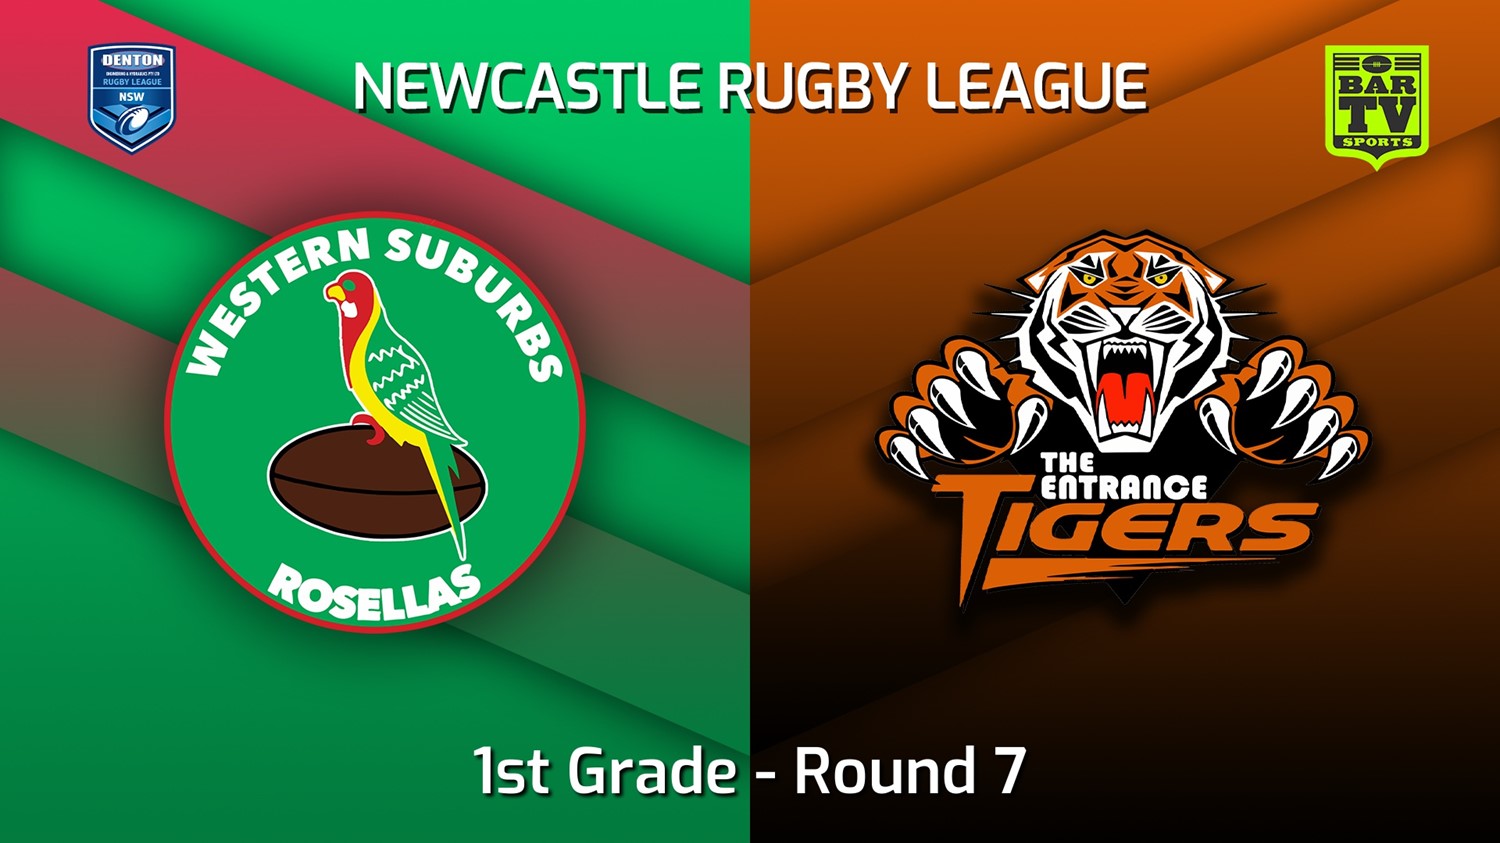 220507-Newcastle Round 7 - 1st Grade - Western Suburbs Rosellas v The Entrance Tigers Slate Image